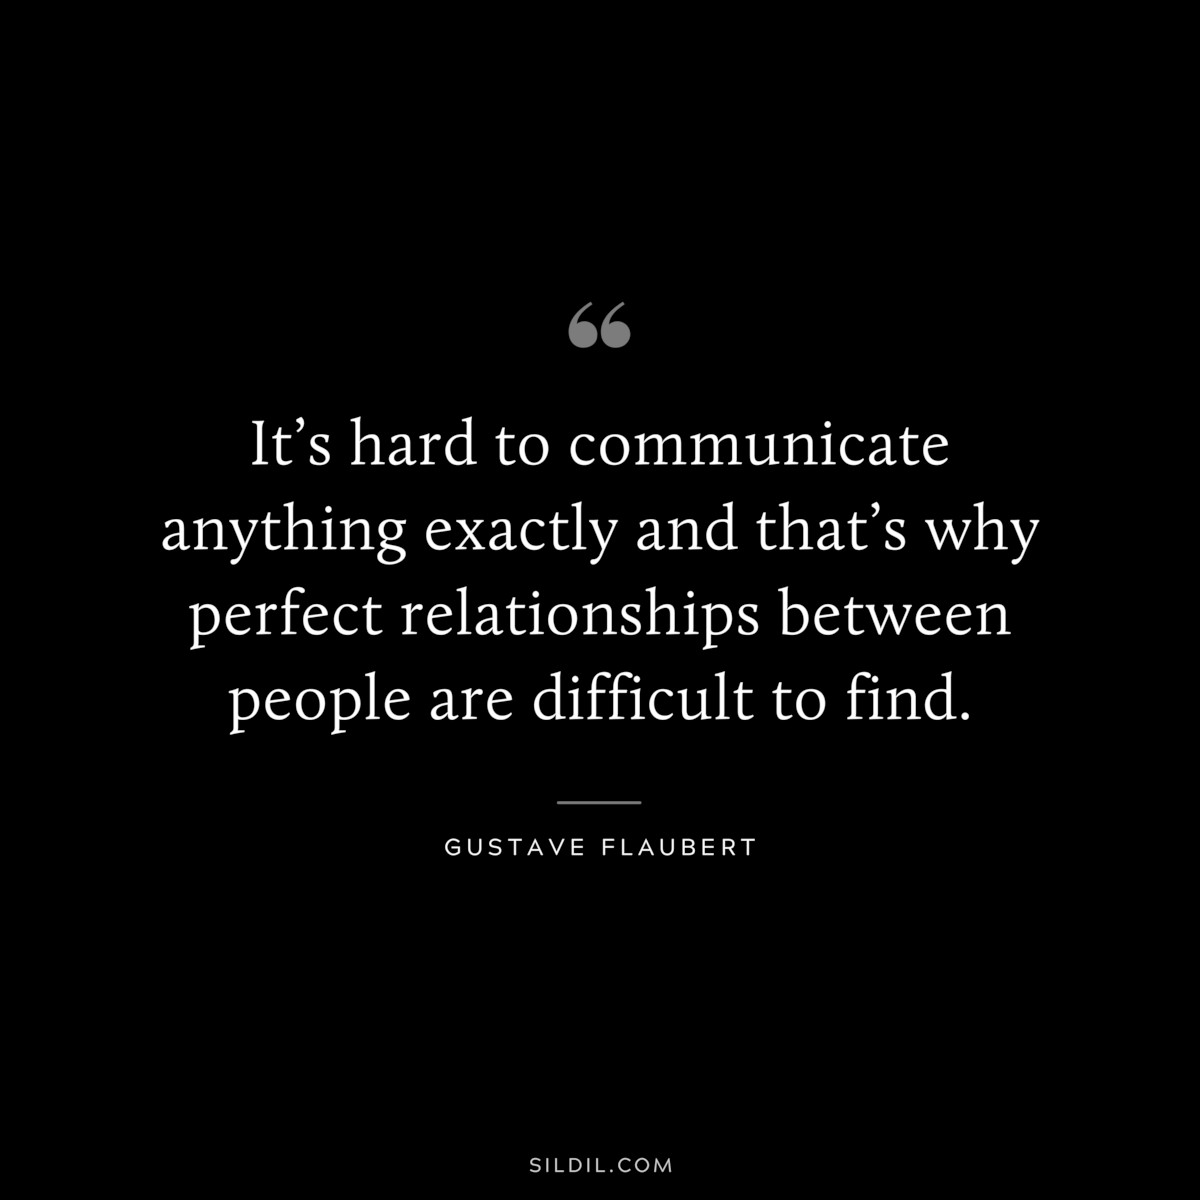 It’s hard to communicate anything exactly and that’s why perfect relationships between people are difficult to find. ― Gustave Flaubert